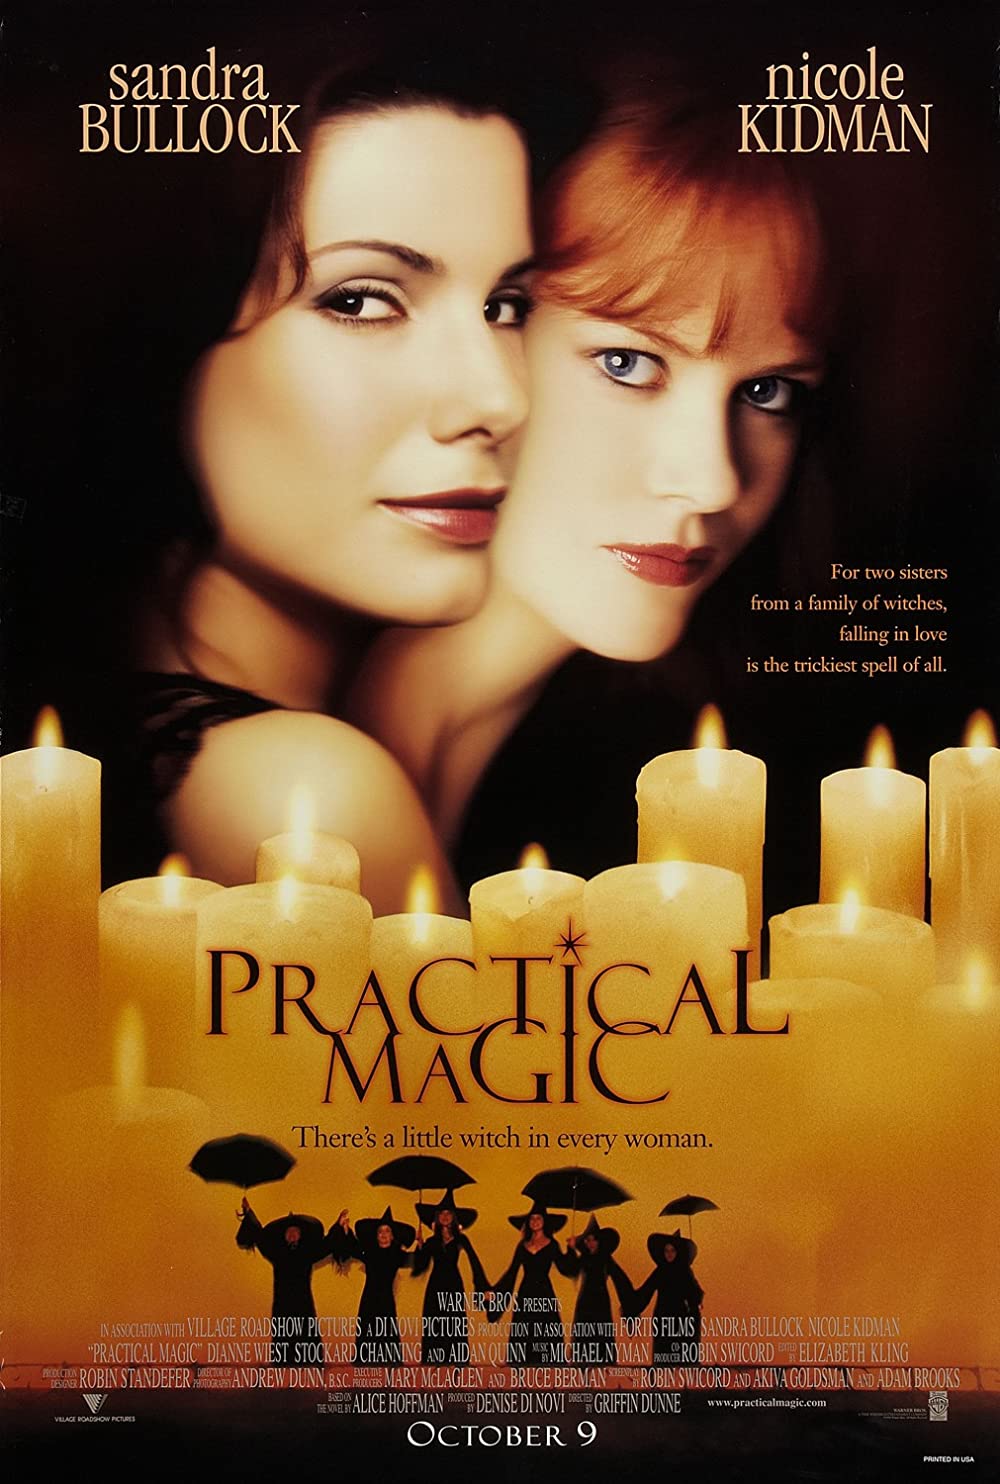 58 Practical Magic Quotes to Inspire and Uplift Your Life